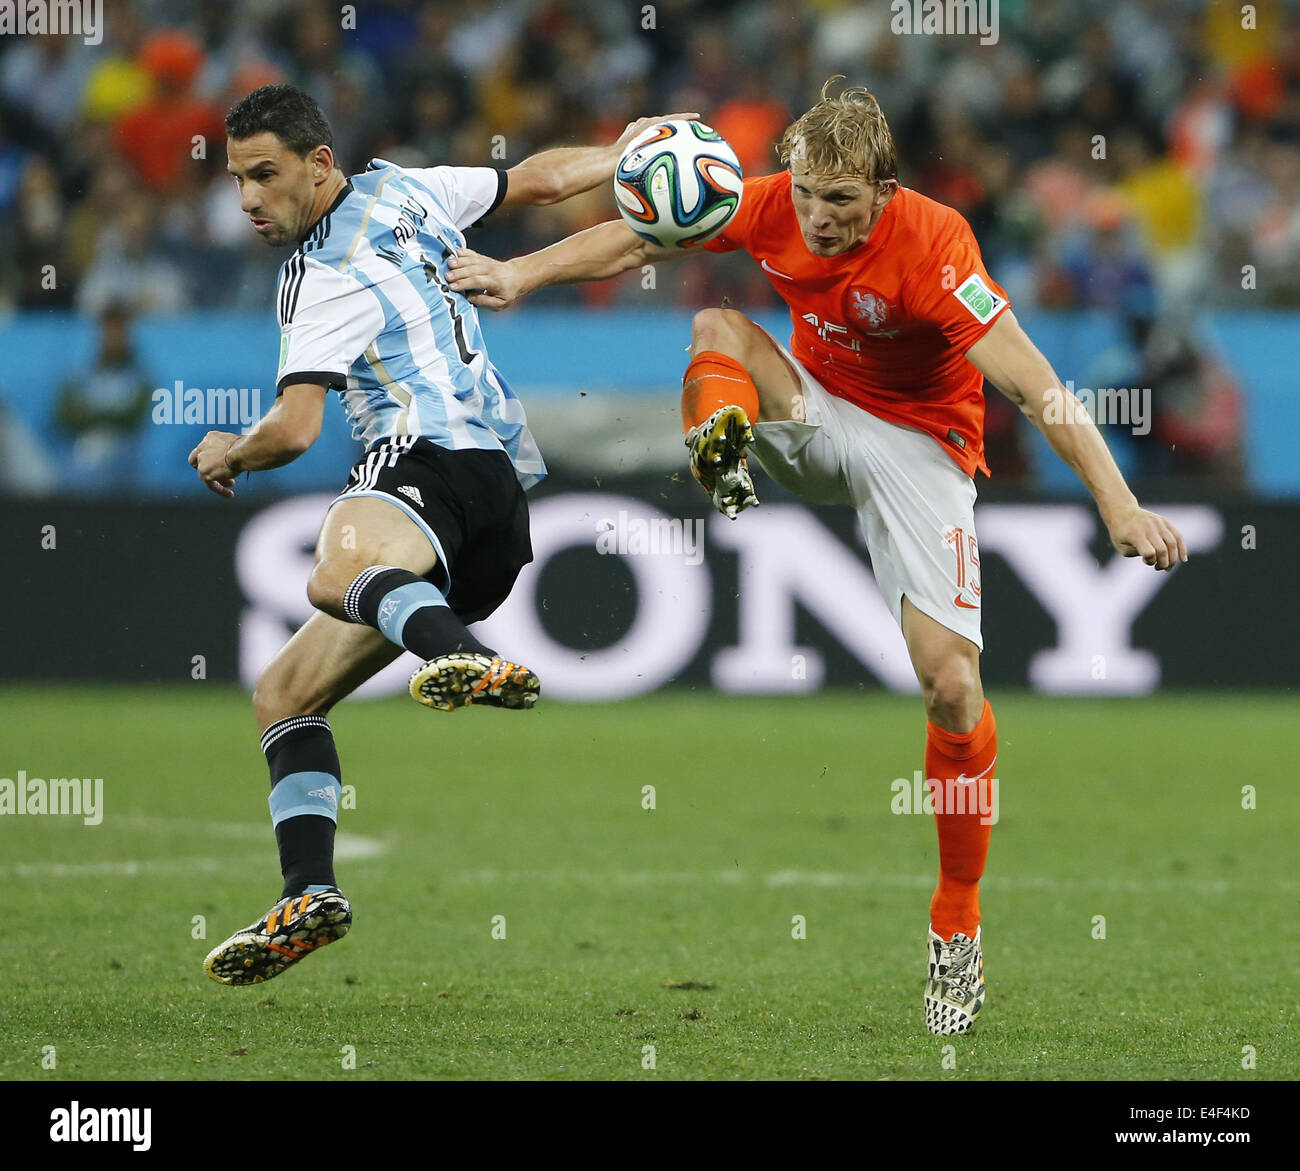 Sao Paulo, Brazil. 9th July, 2014. Argentina's Maxi Rodriguez (L) vies with Netherlands' Dirk Kuyt during a semifinal match between Netherlands and Argentina of 2014 FIFA World Cup at the Arena de Sao Paulo Stadium in Sao Paulo, Brazil, on July 9, 2014. Argentina won 4-2 on penalties over Netherlands after a 0-0 tie and qualified for the final on Wednesday. Credit:  Zhou Lei/Xinhua/Alamy Live News Stock Photo